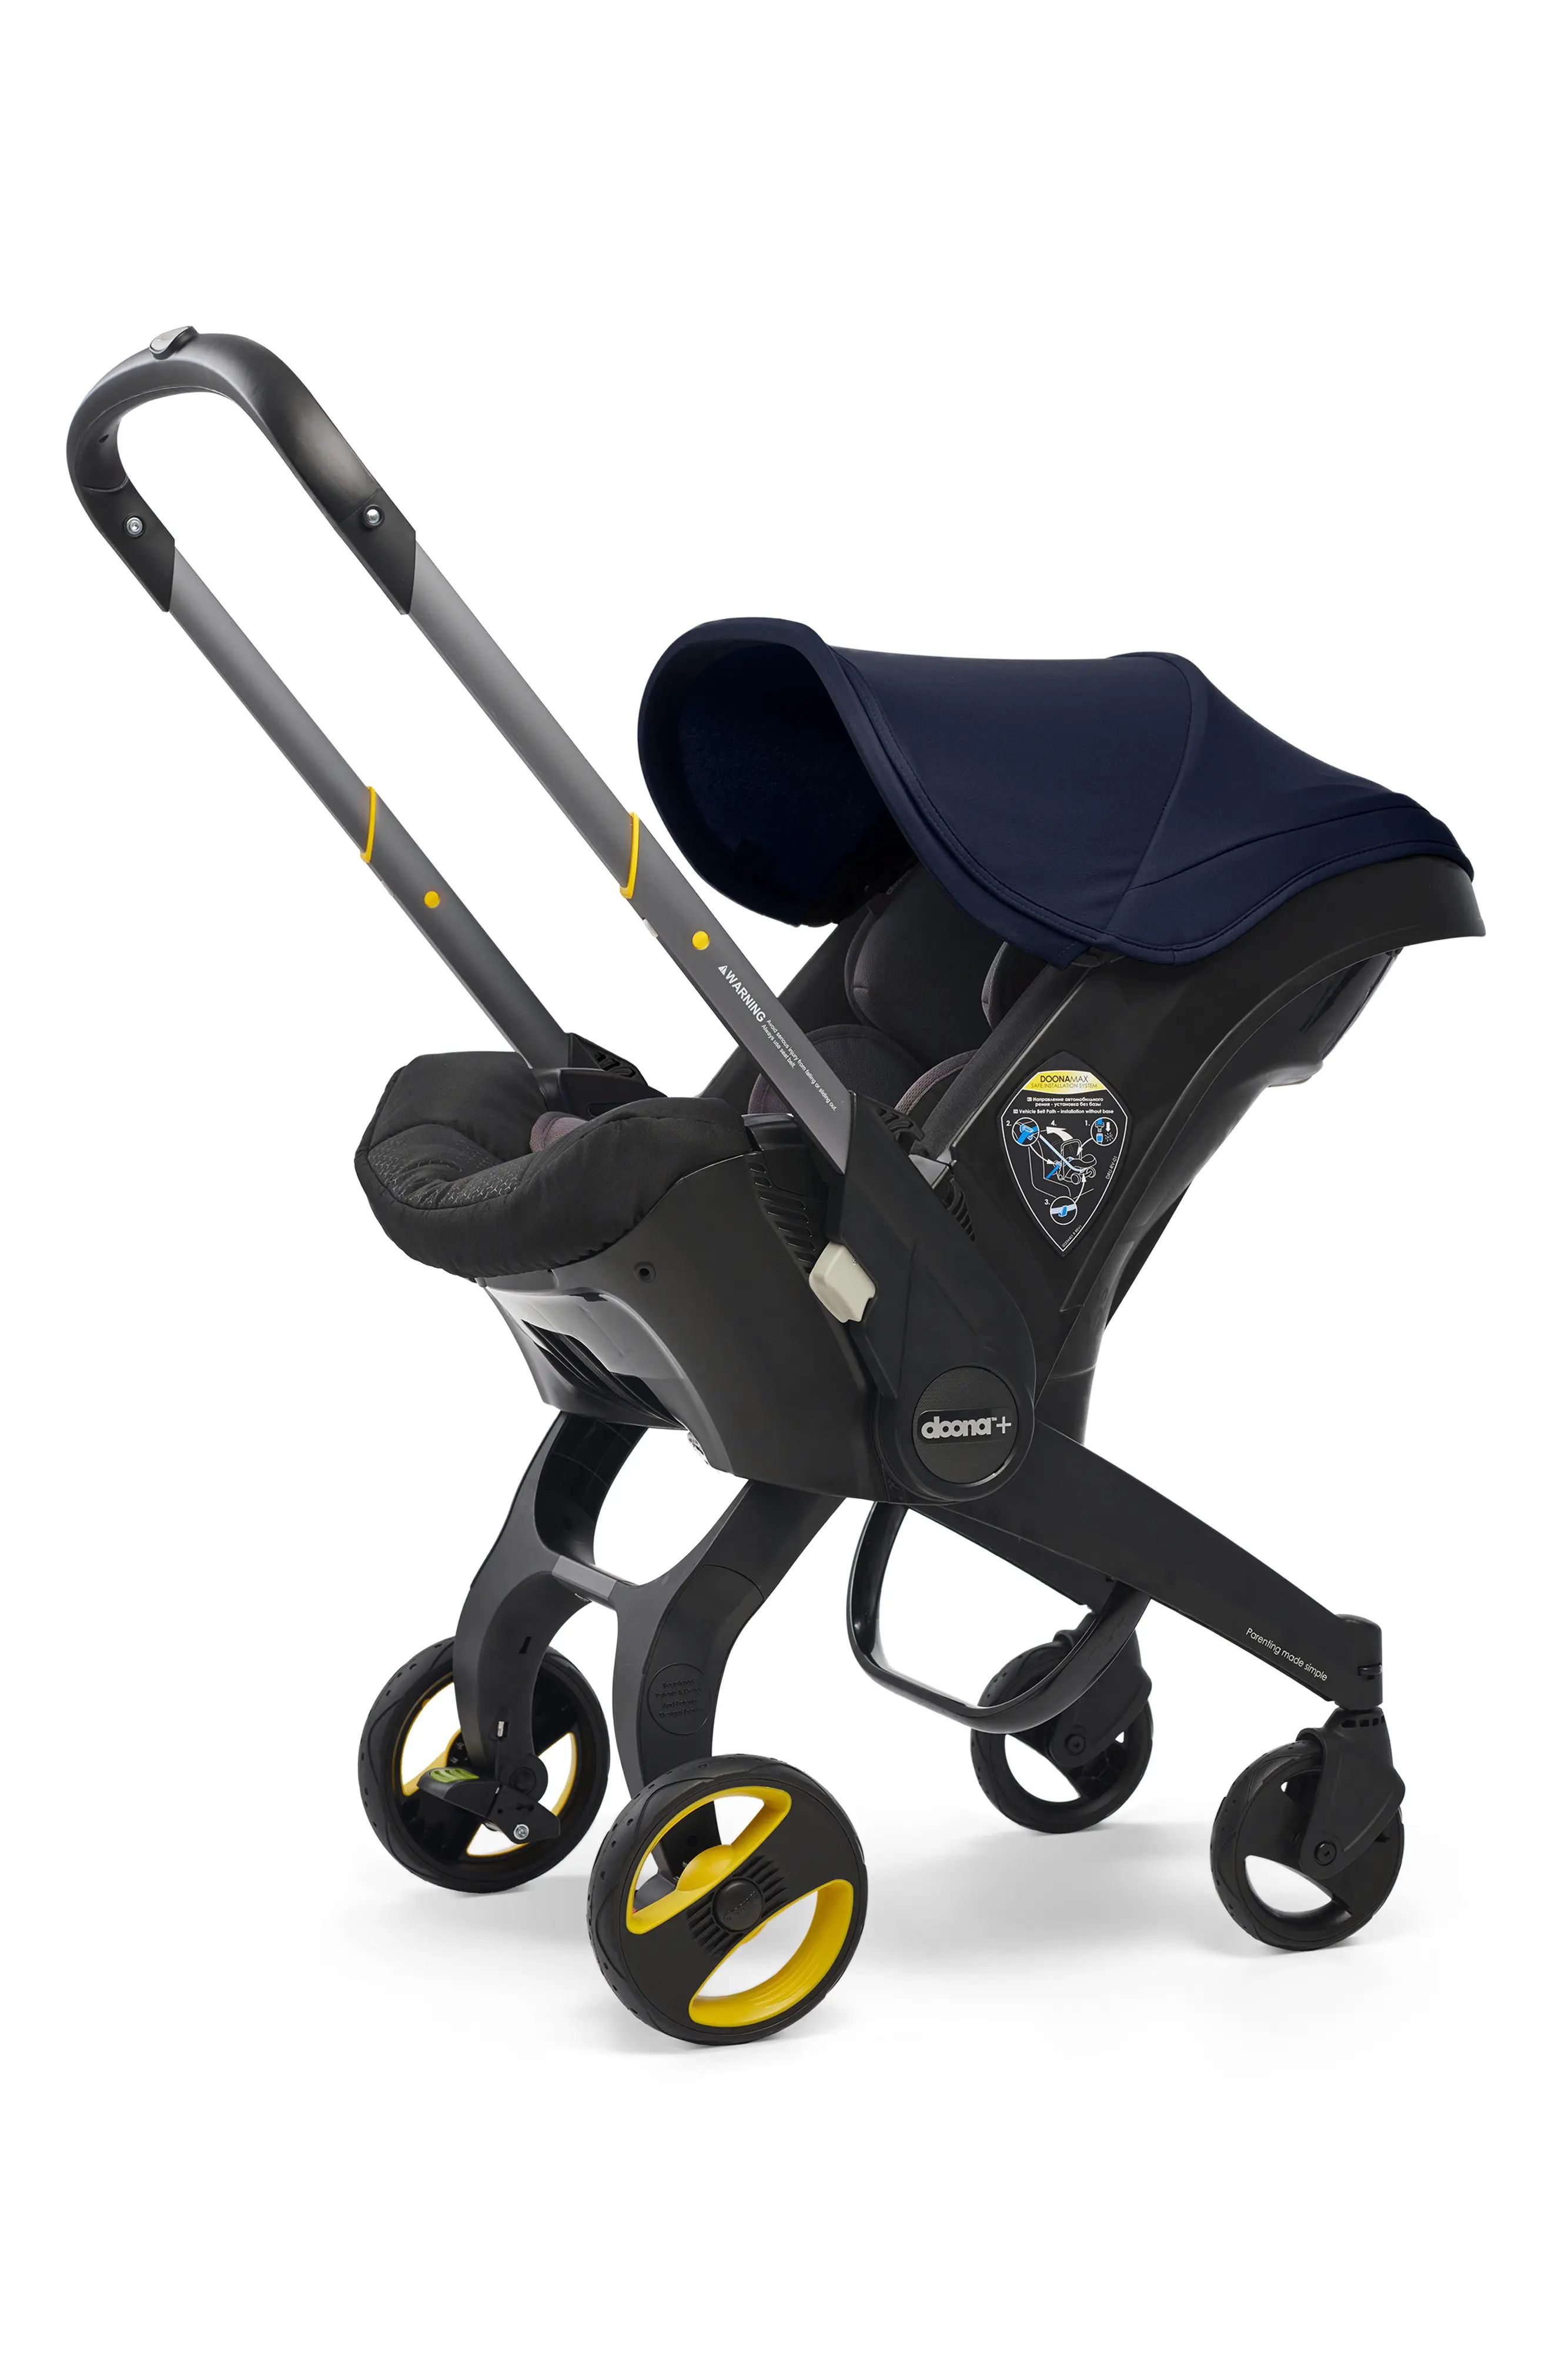 Infant Doona Convertible Infant Car Seat/compact Stroller System With Base, Size One Size - Blue | Nordstrom